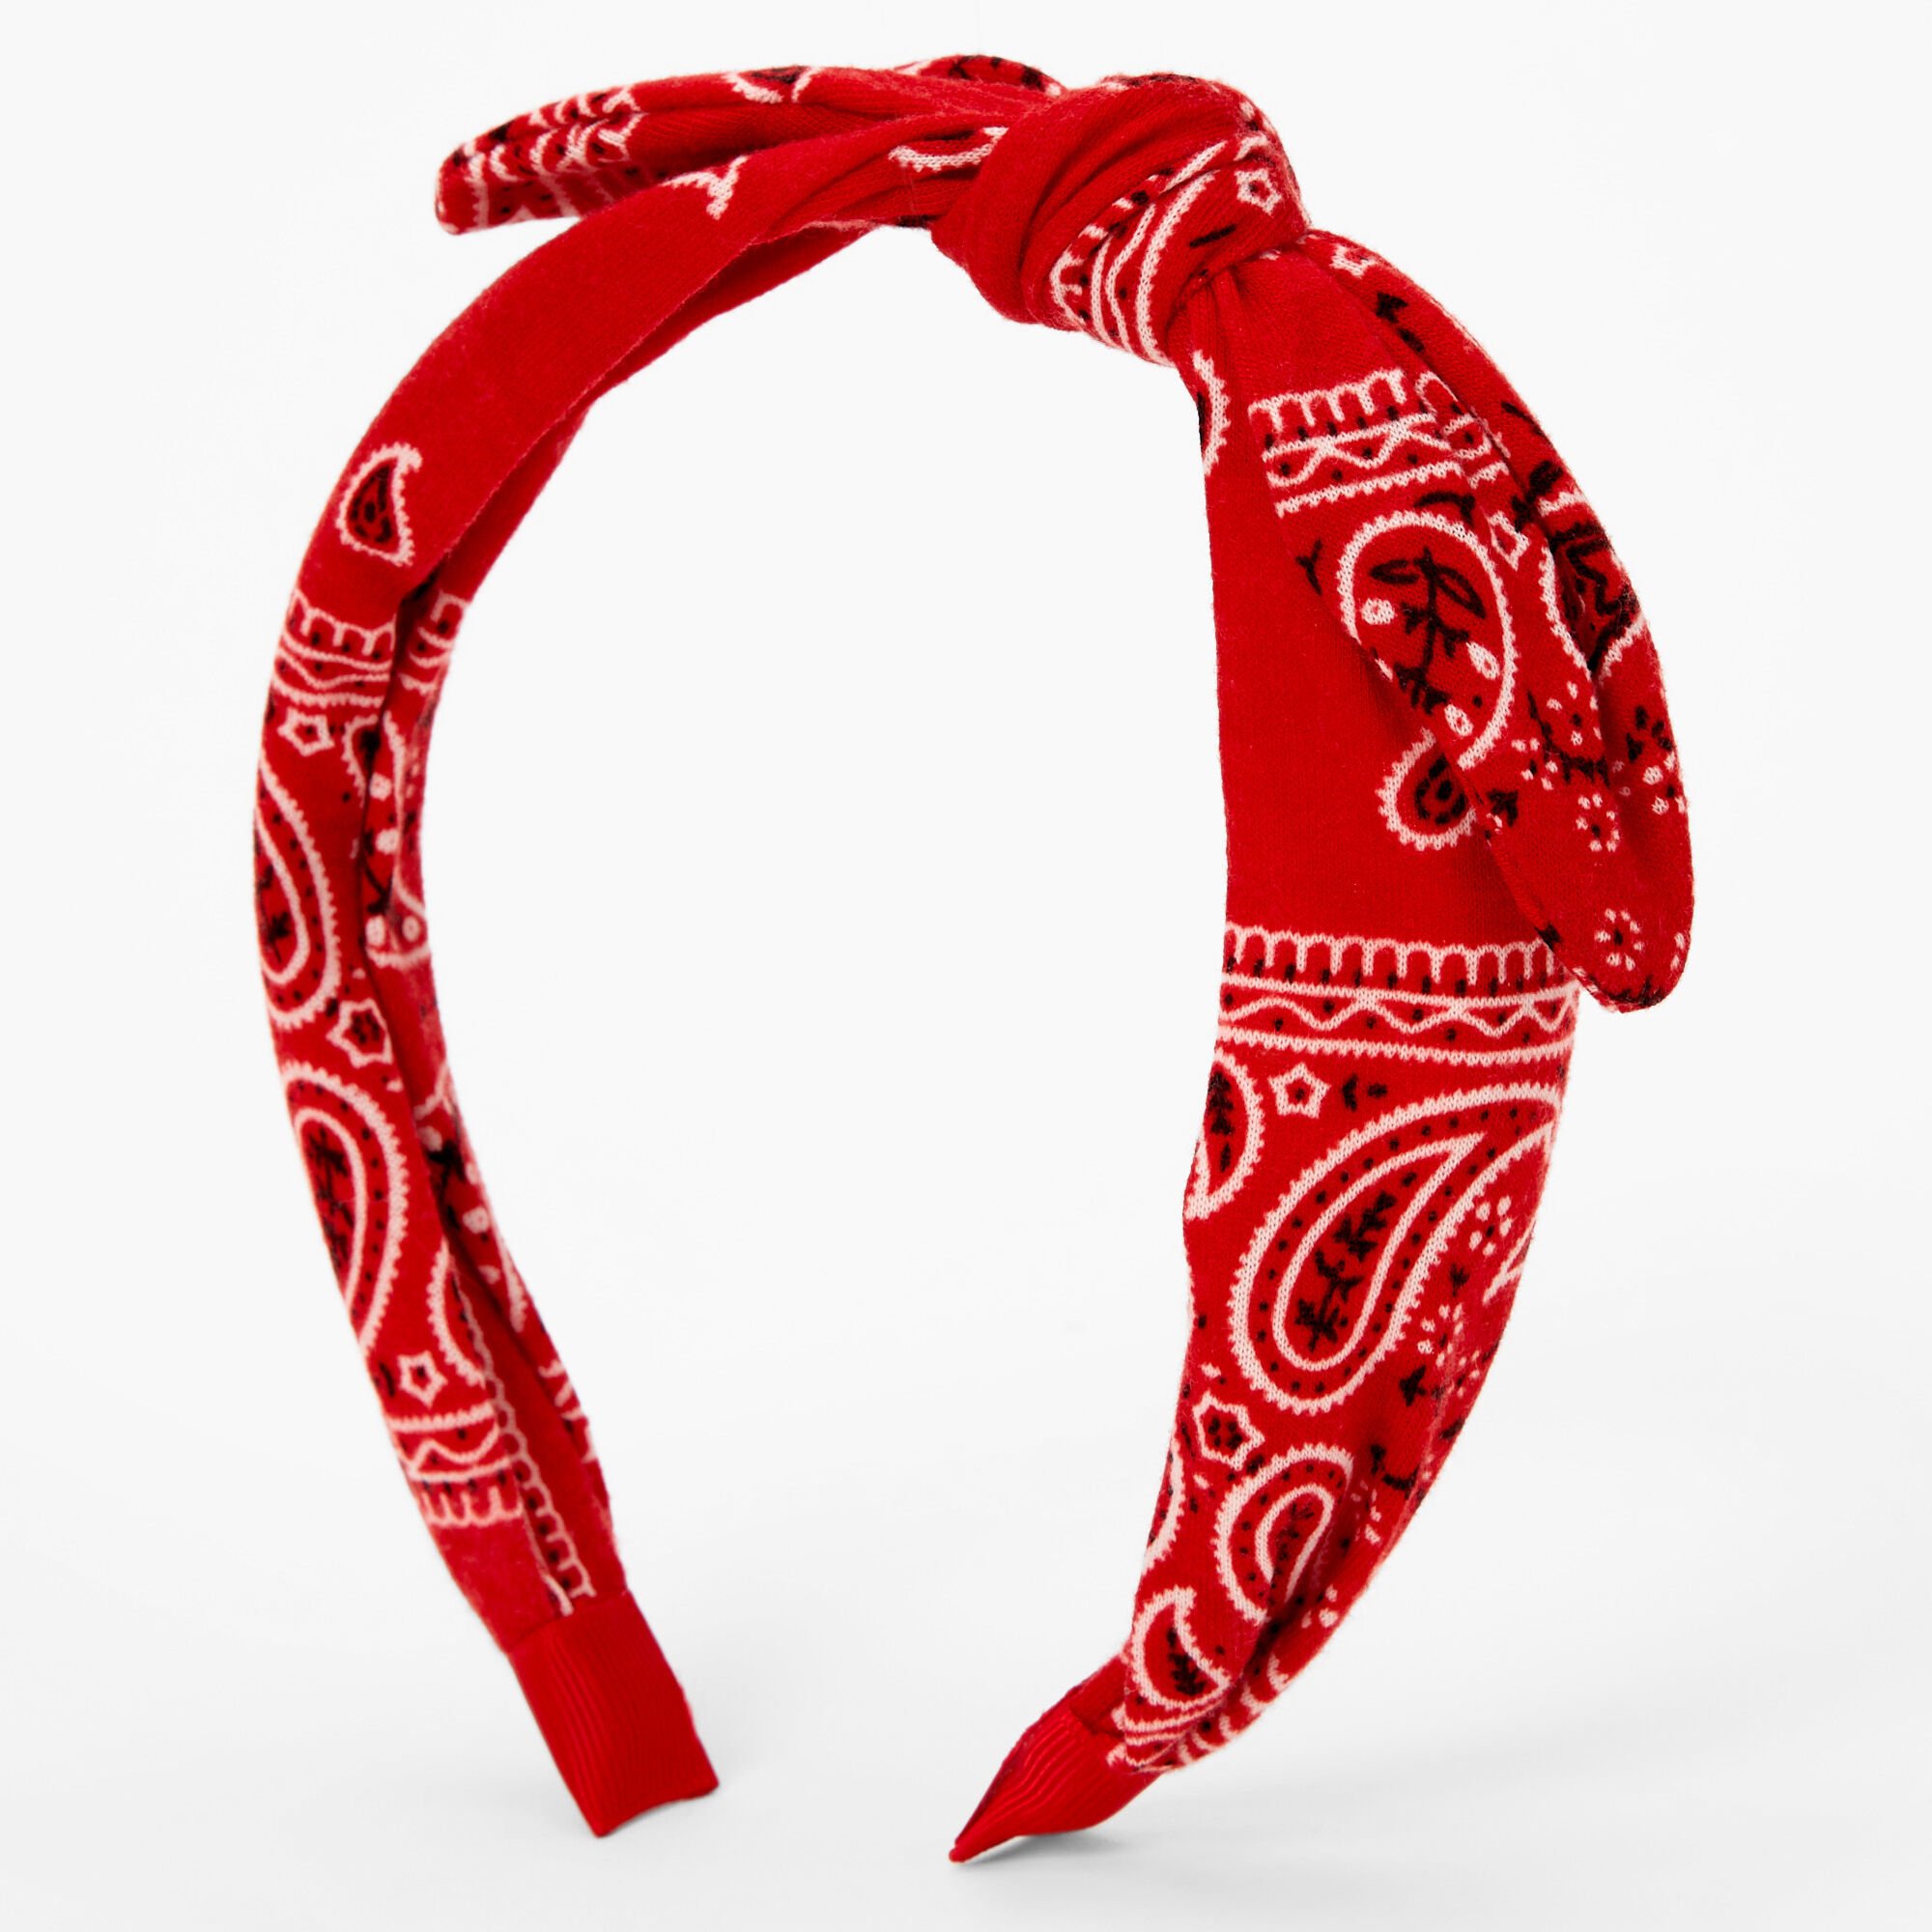 View Claires Bandana Knotted Bow Headband Red information